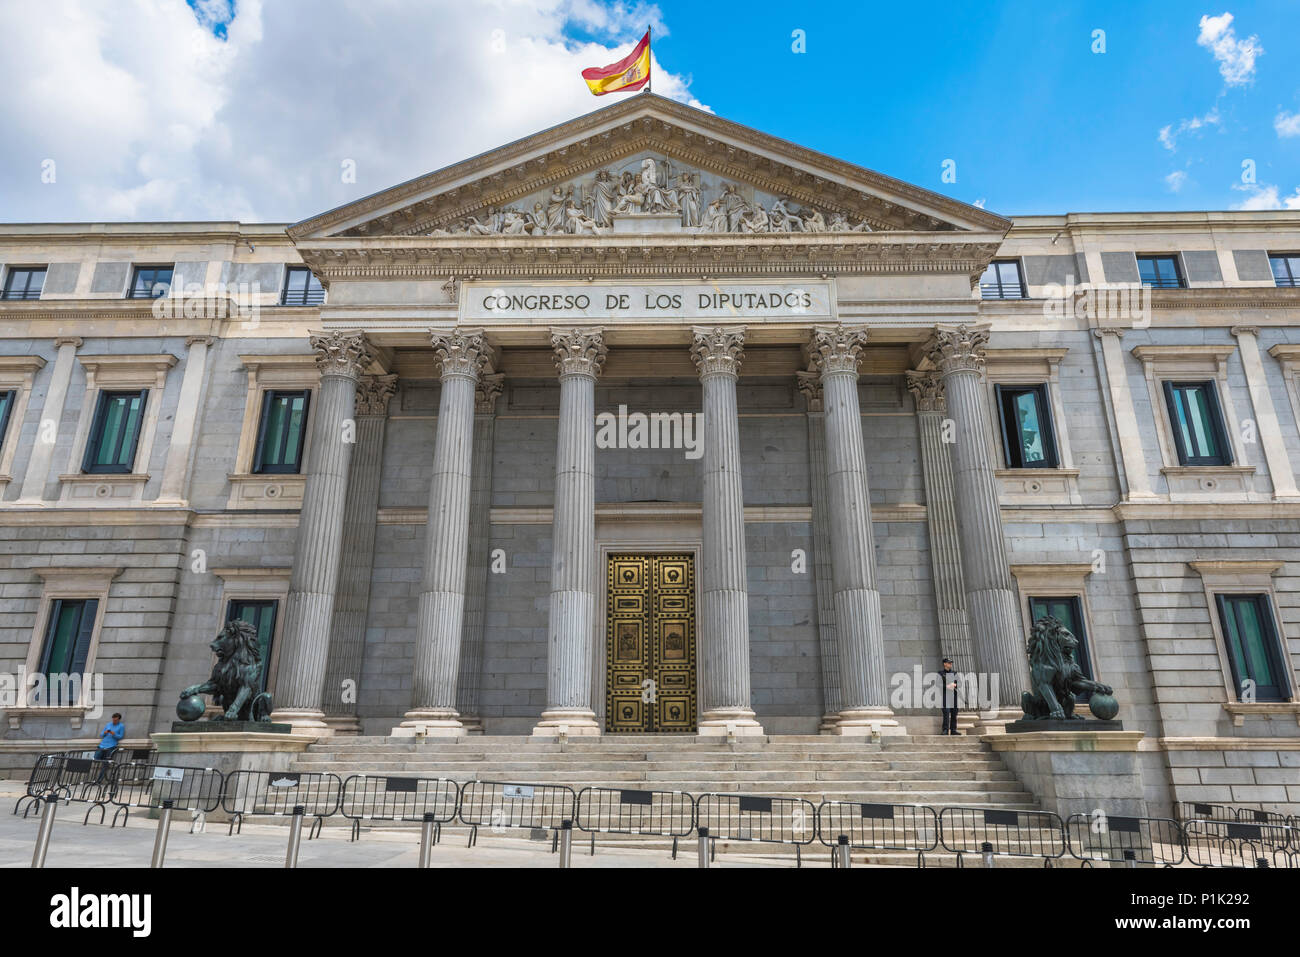 Spain parliament building, view of the Congreso de Los Diputados - the Spanish parliament building - in central Madrid, Spain. Stock Photo